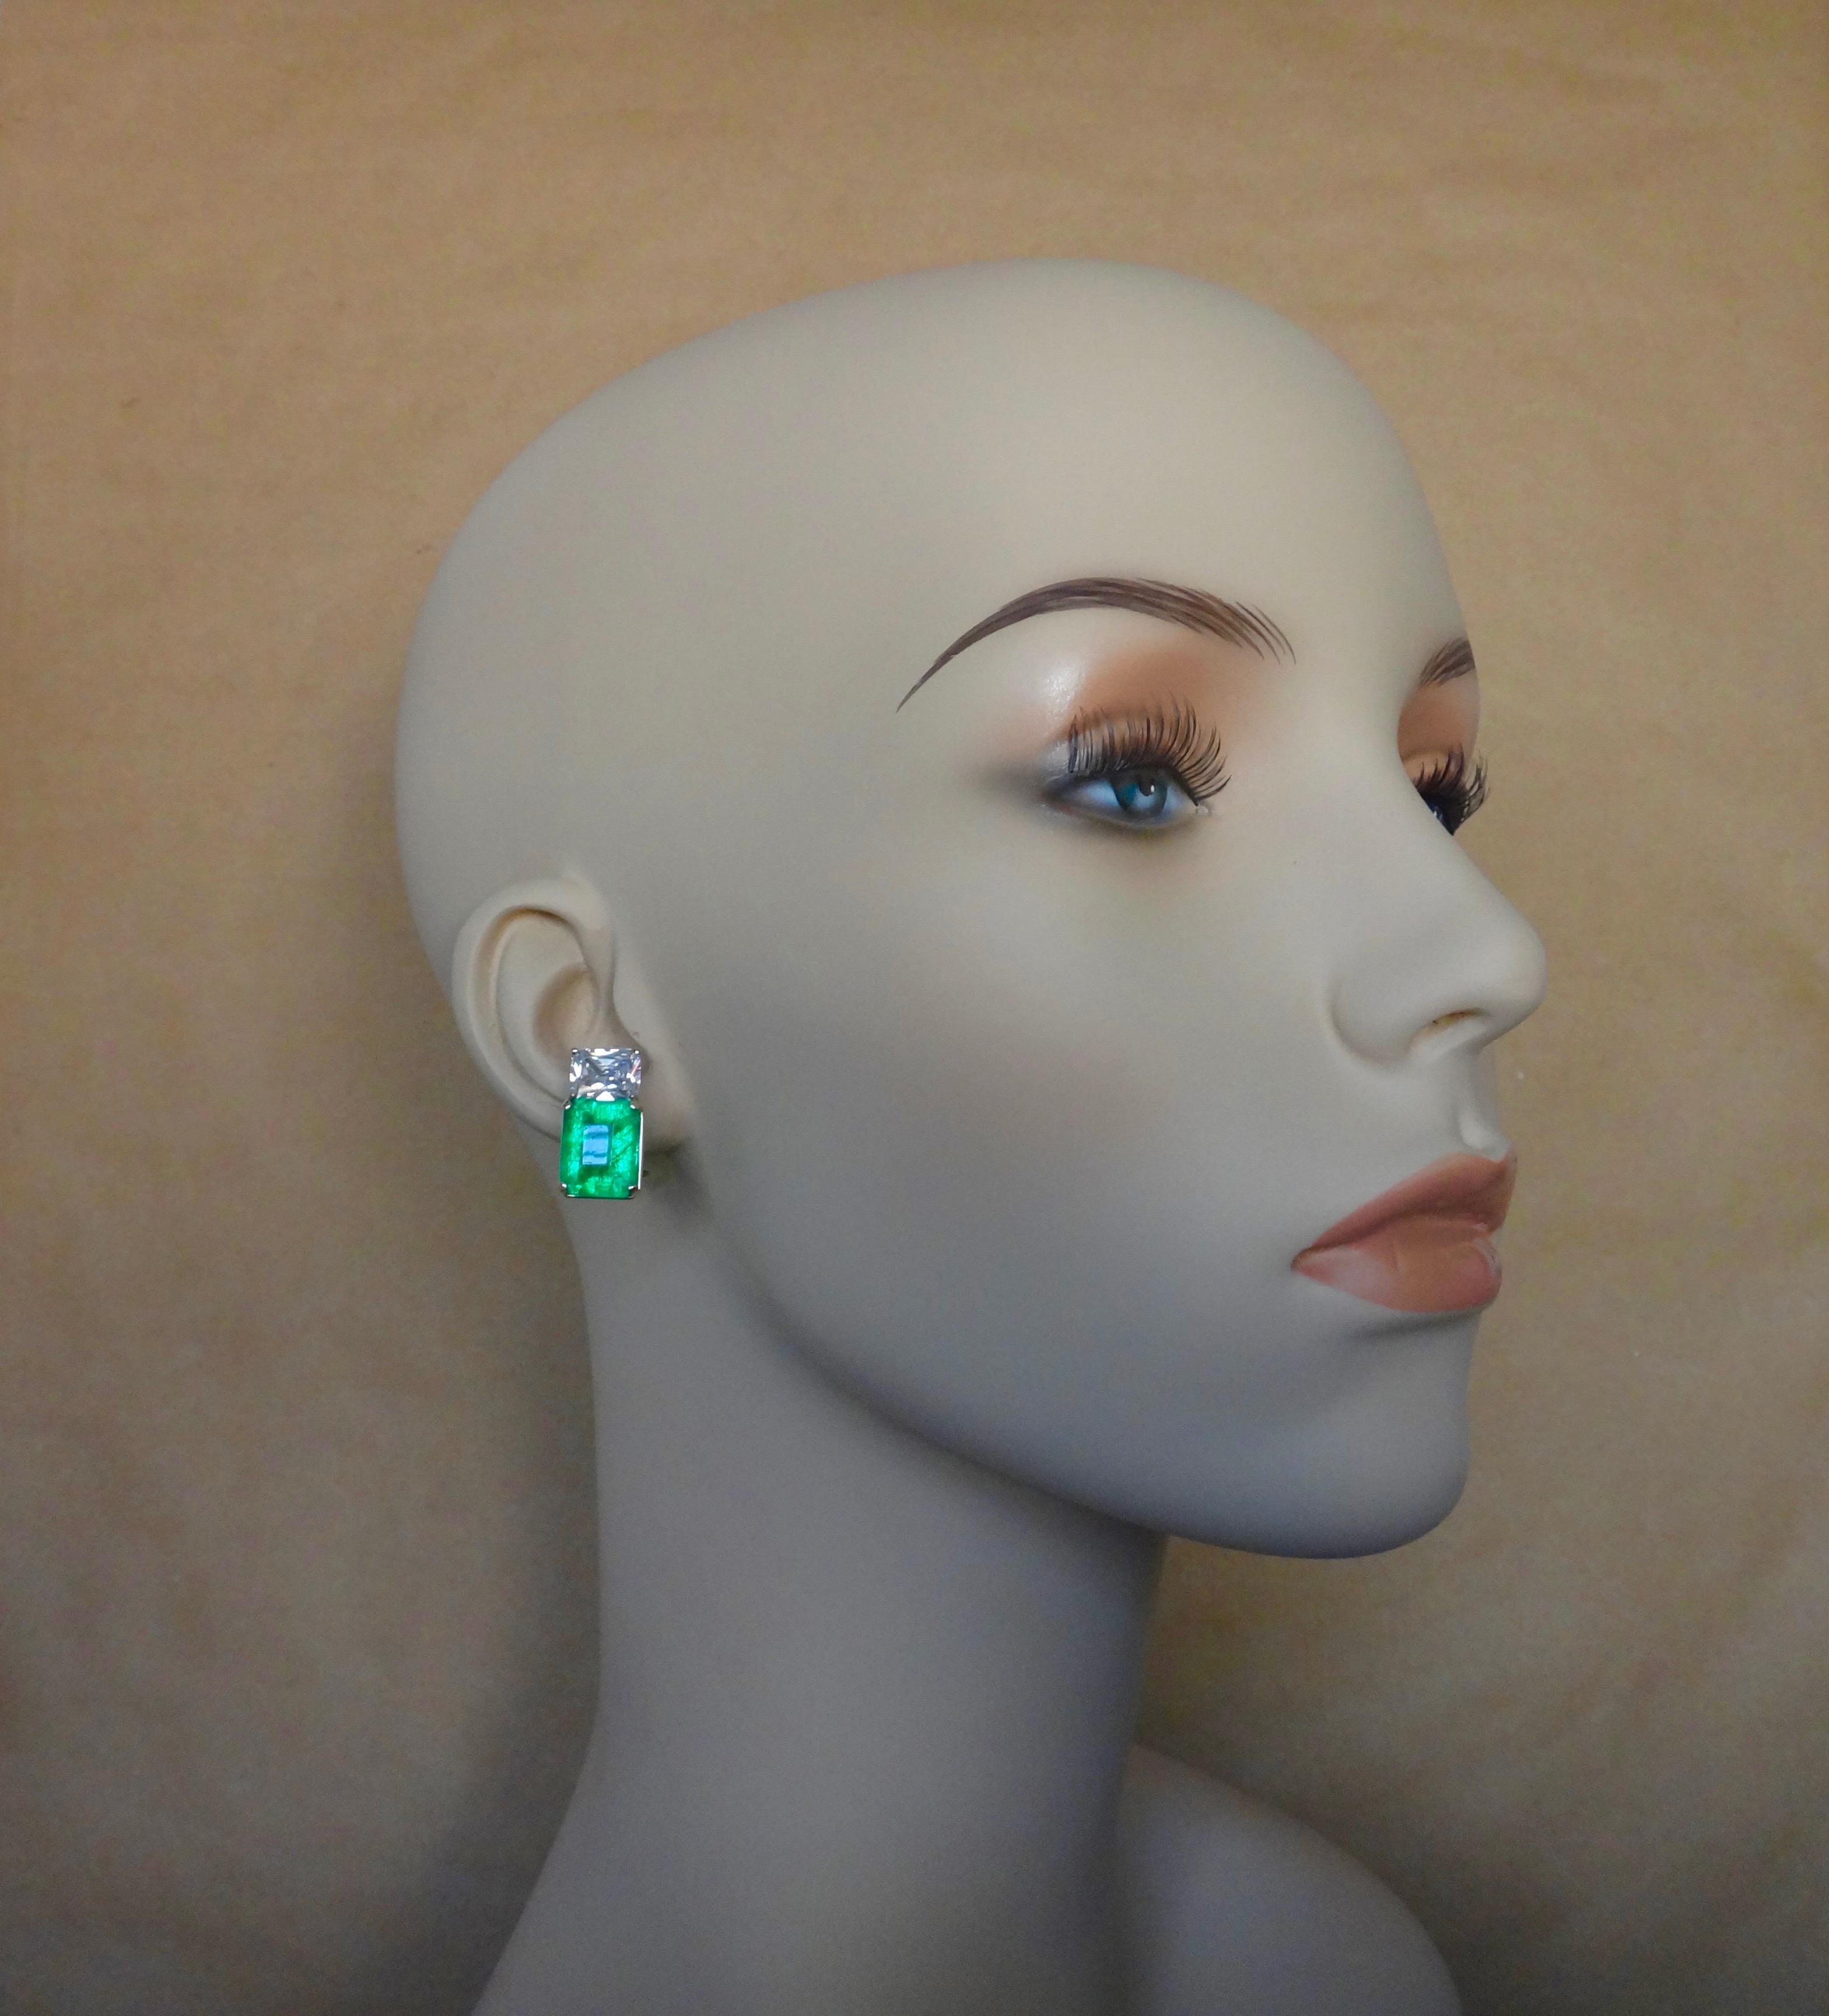 A pair of beautifully matched African emeralds are complimented by a pair of radiant cut silver sapphires in these classic and elegant earrings.  The emeralds possess a luscious 